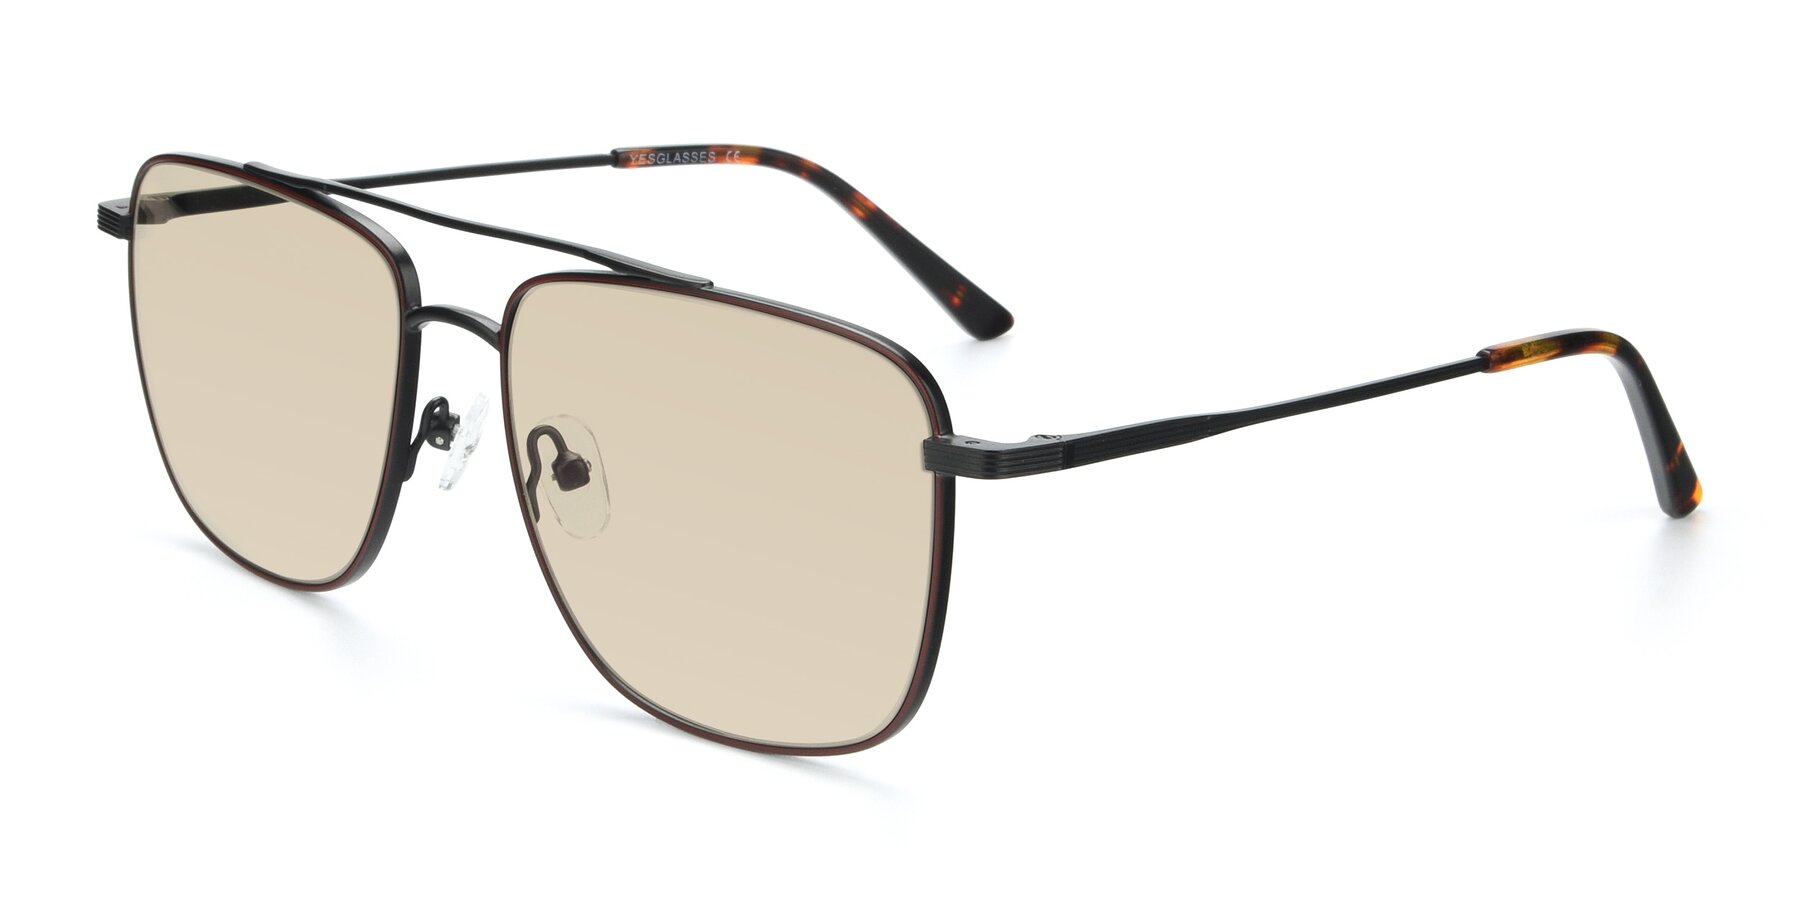 Angle of 9519 in Brown-Black with Light Brown Tinted Lenses